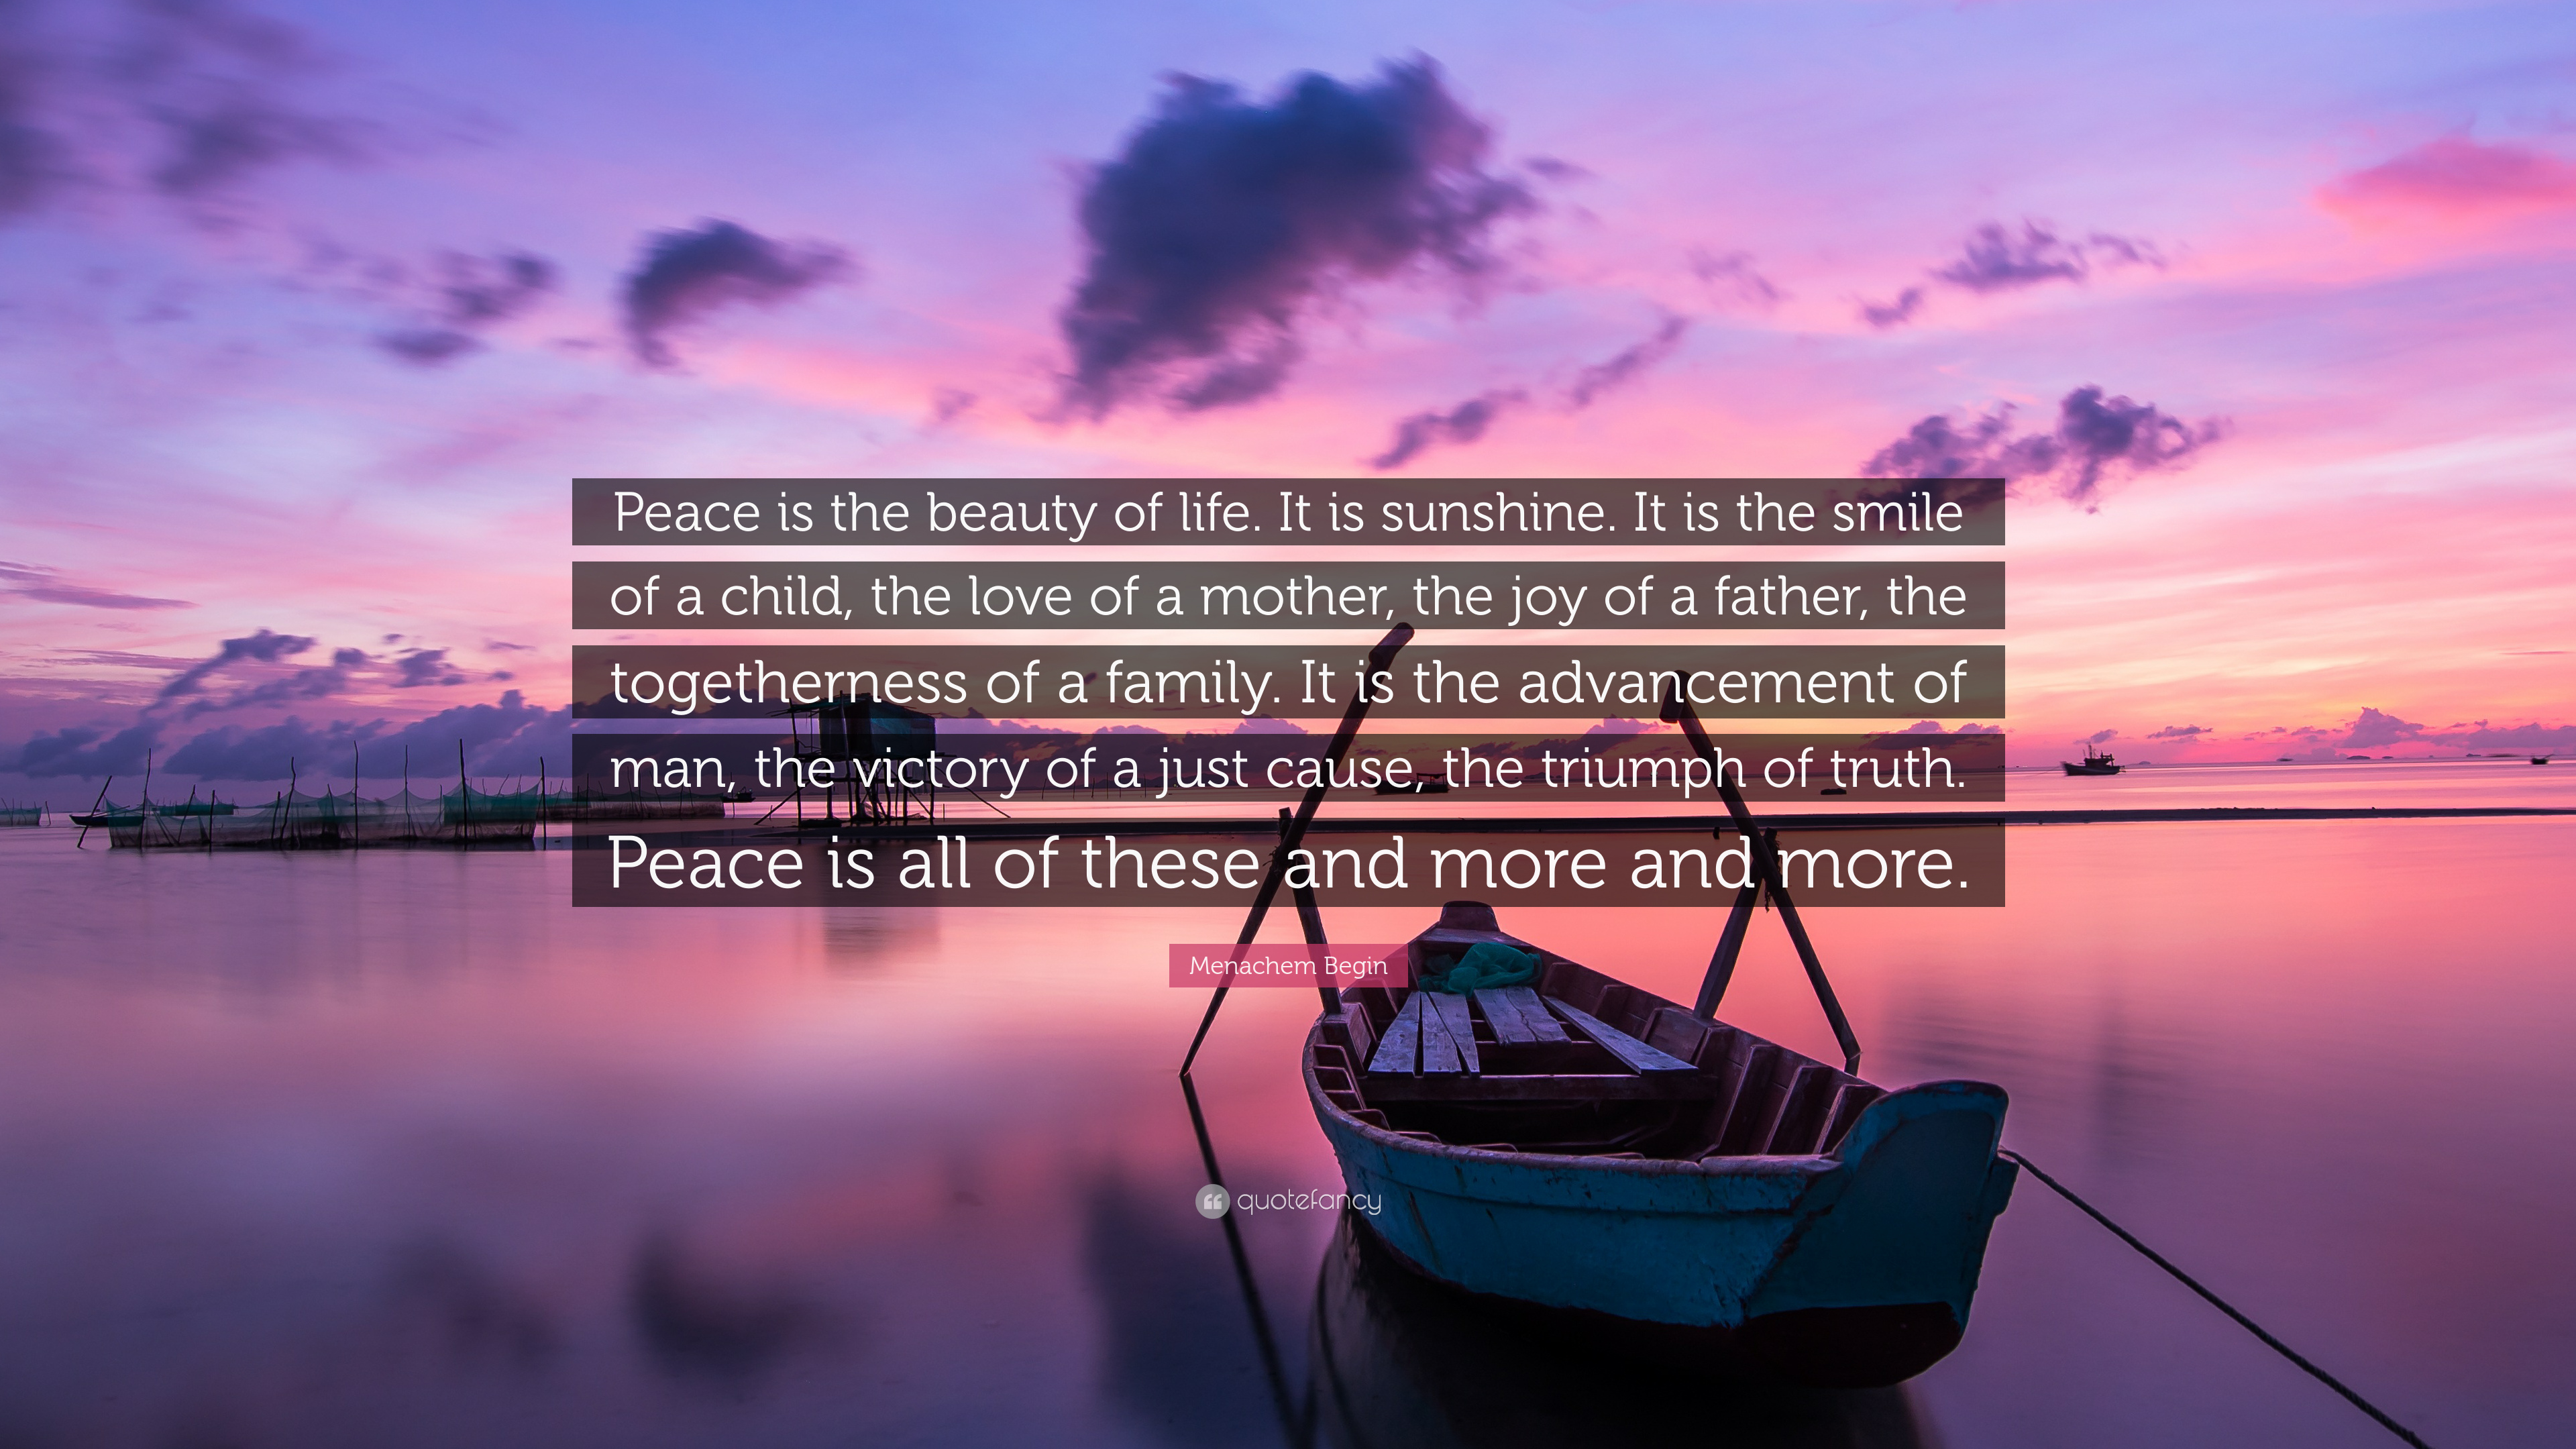 Menachem Begin Quote: “Peace is the beauty of life. It is sunshine